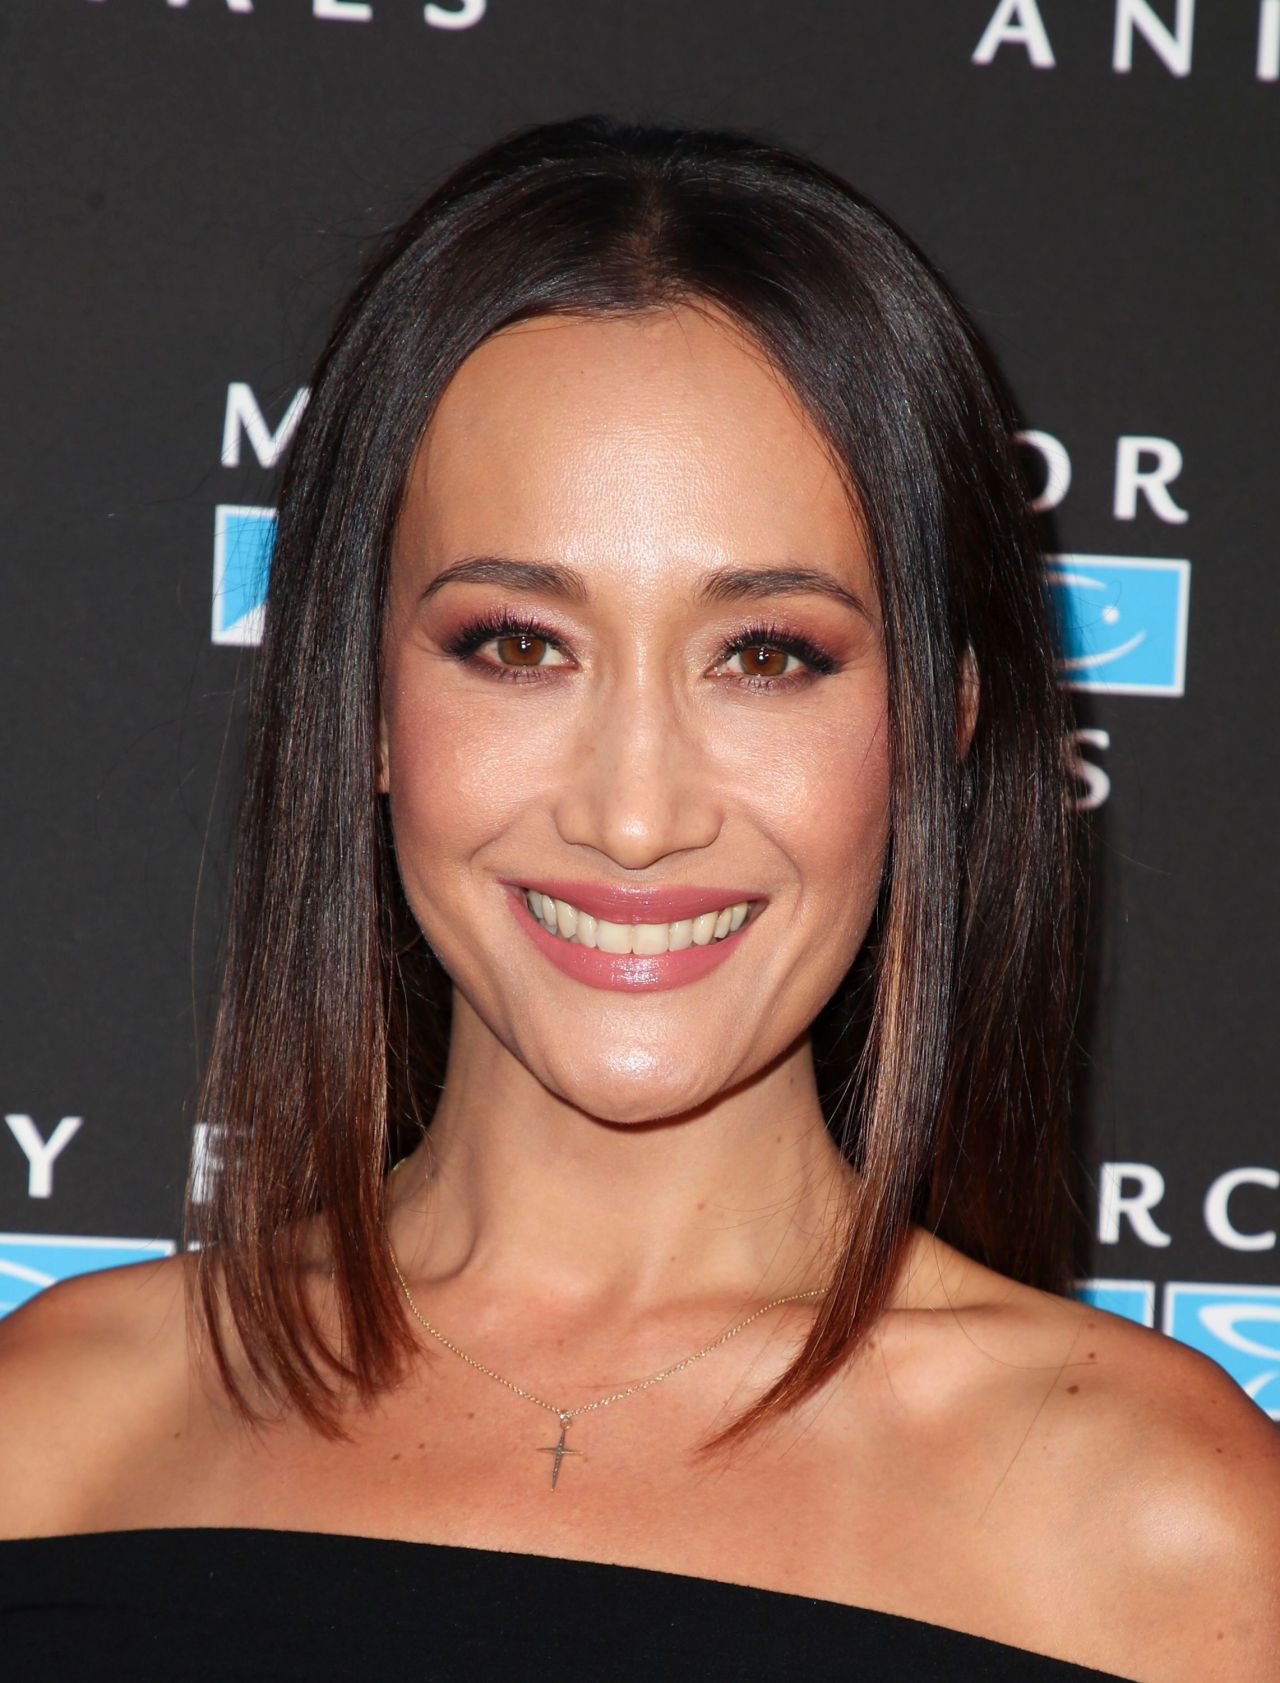 Maggie Q Net Worth, Age, Height, Husband, Profile, Movies